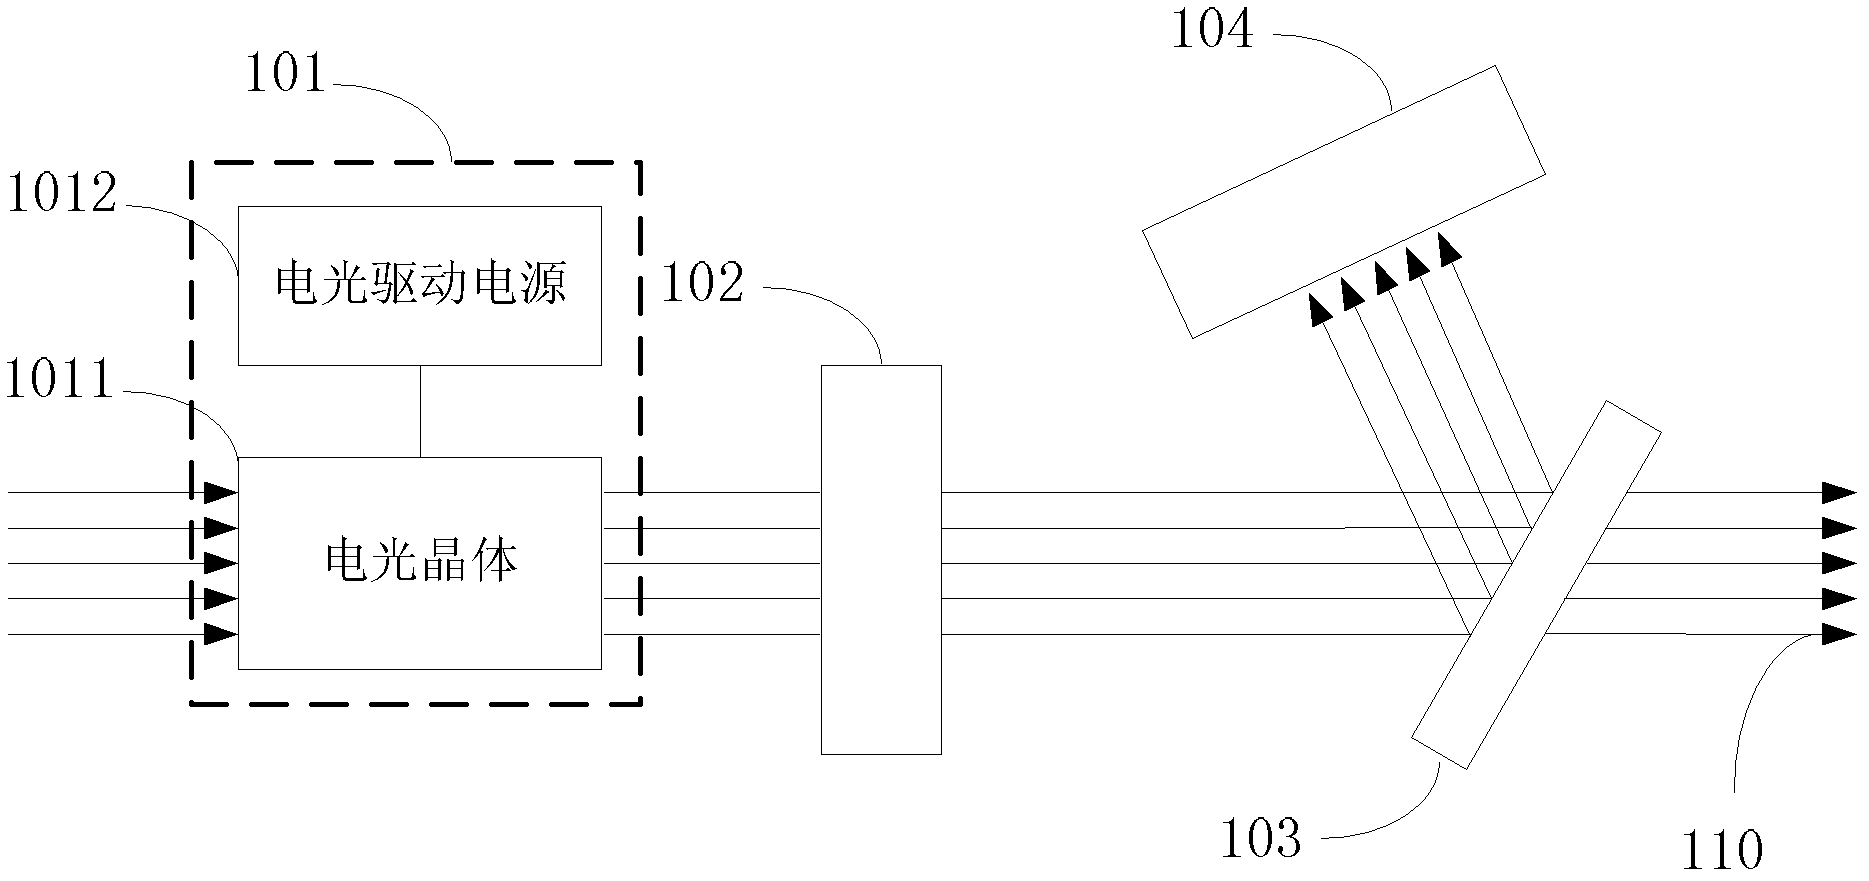 Period-modulated flat-topped pulse device for accurately controlling output power/energy